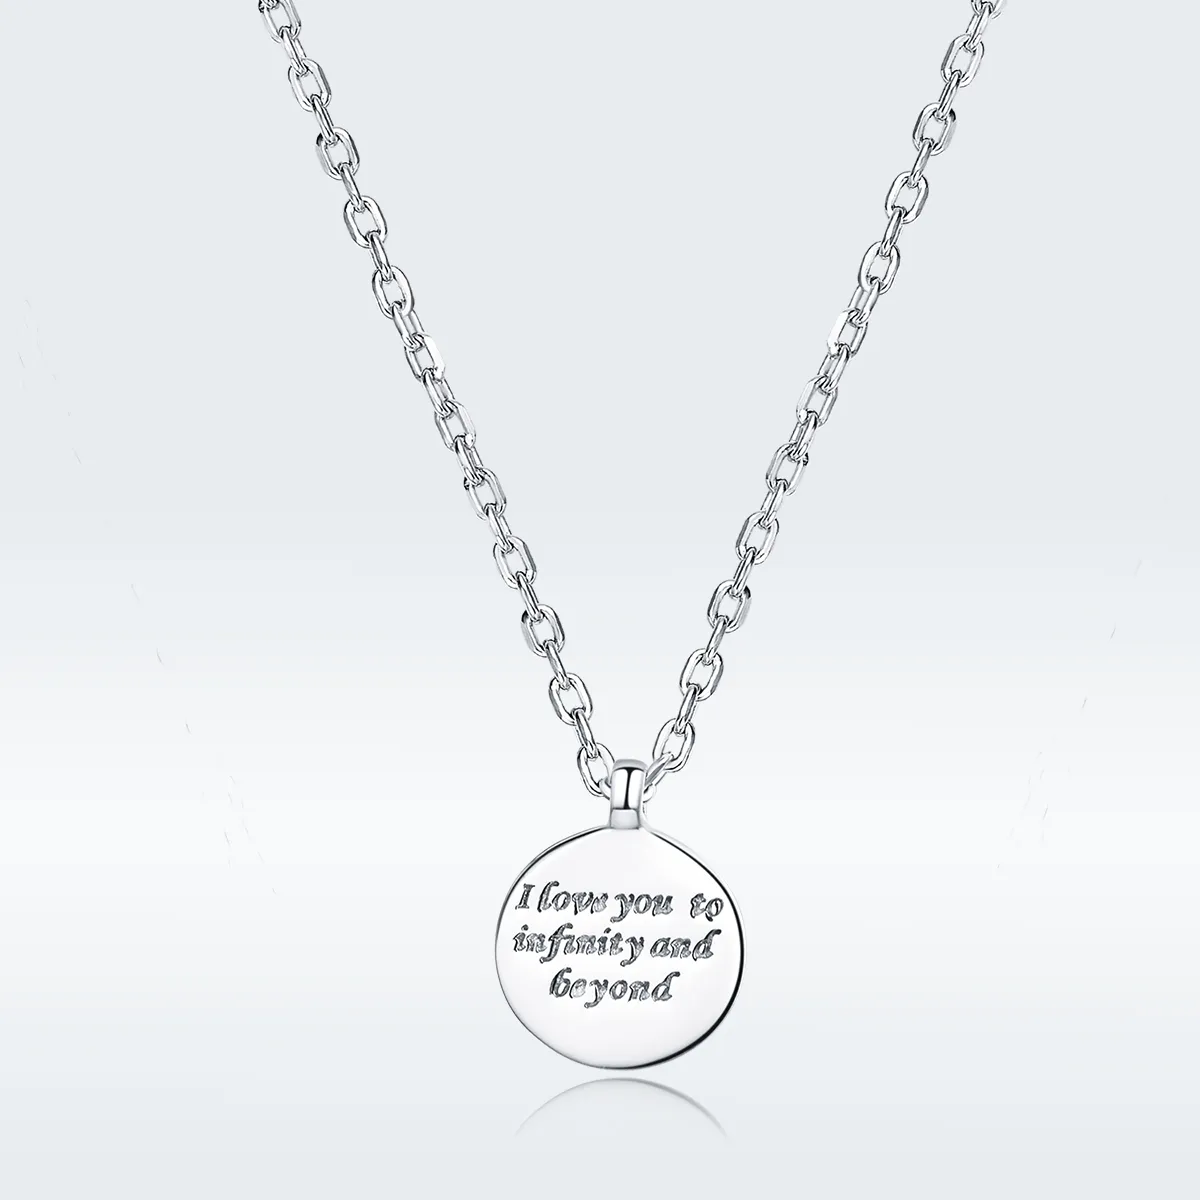 Pandora Style Silver Confessions Necklace - SCN374